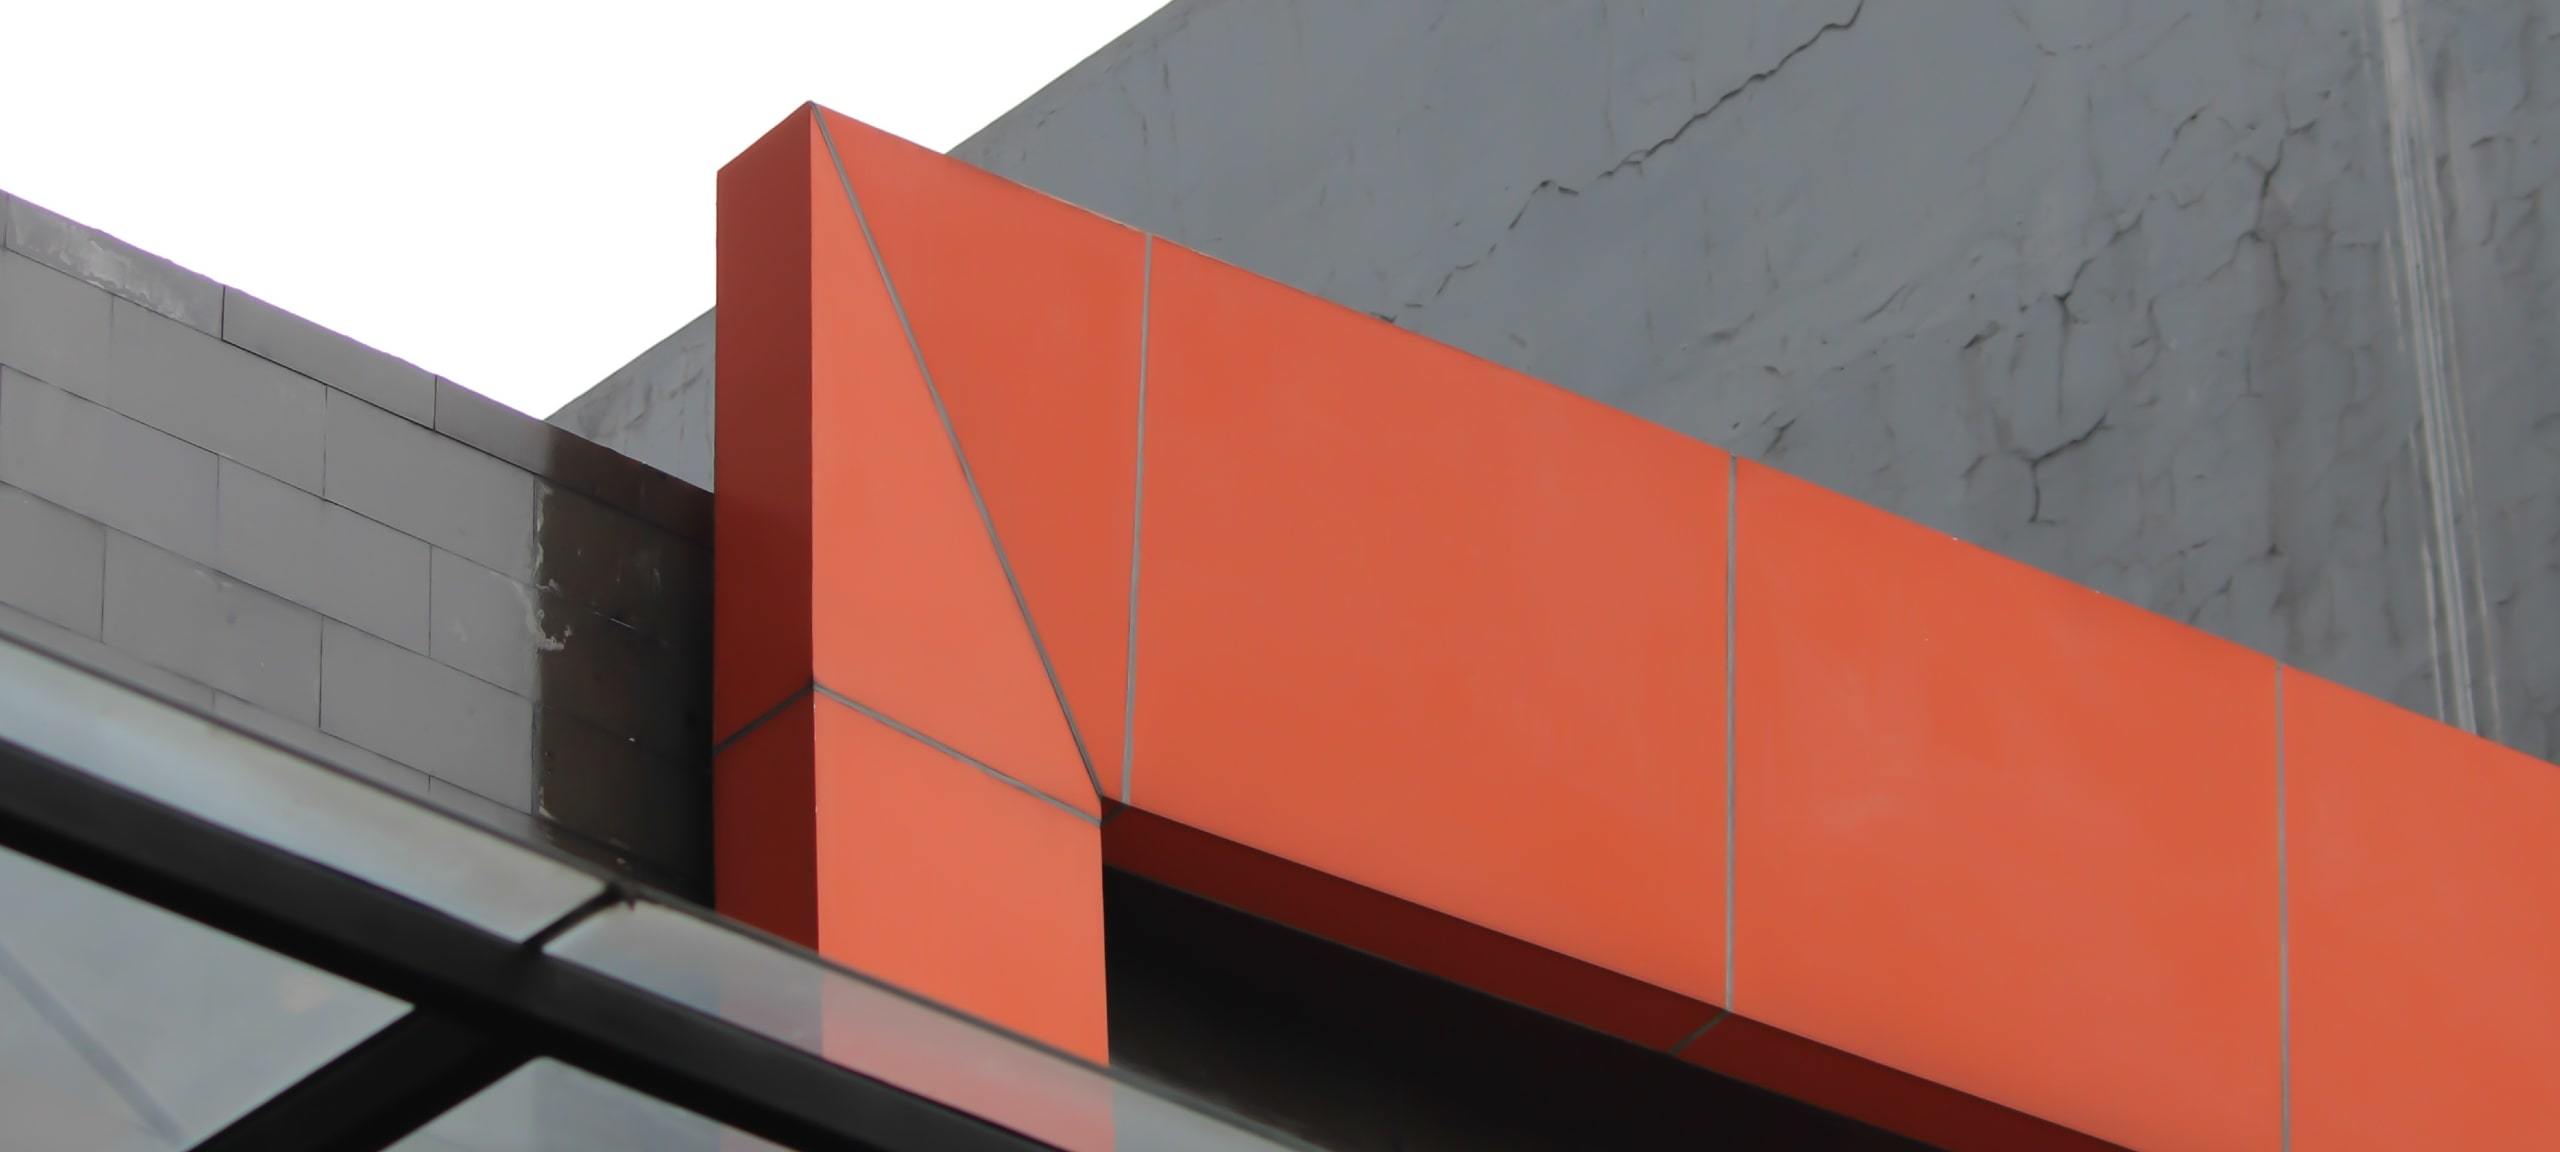 Abstract architecture, gray and orange, on a modern building